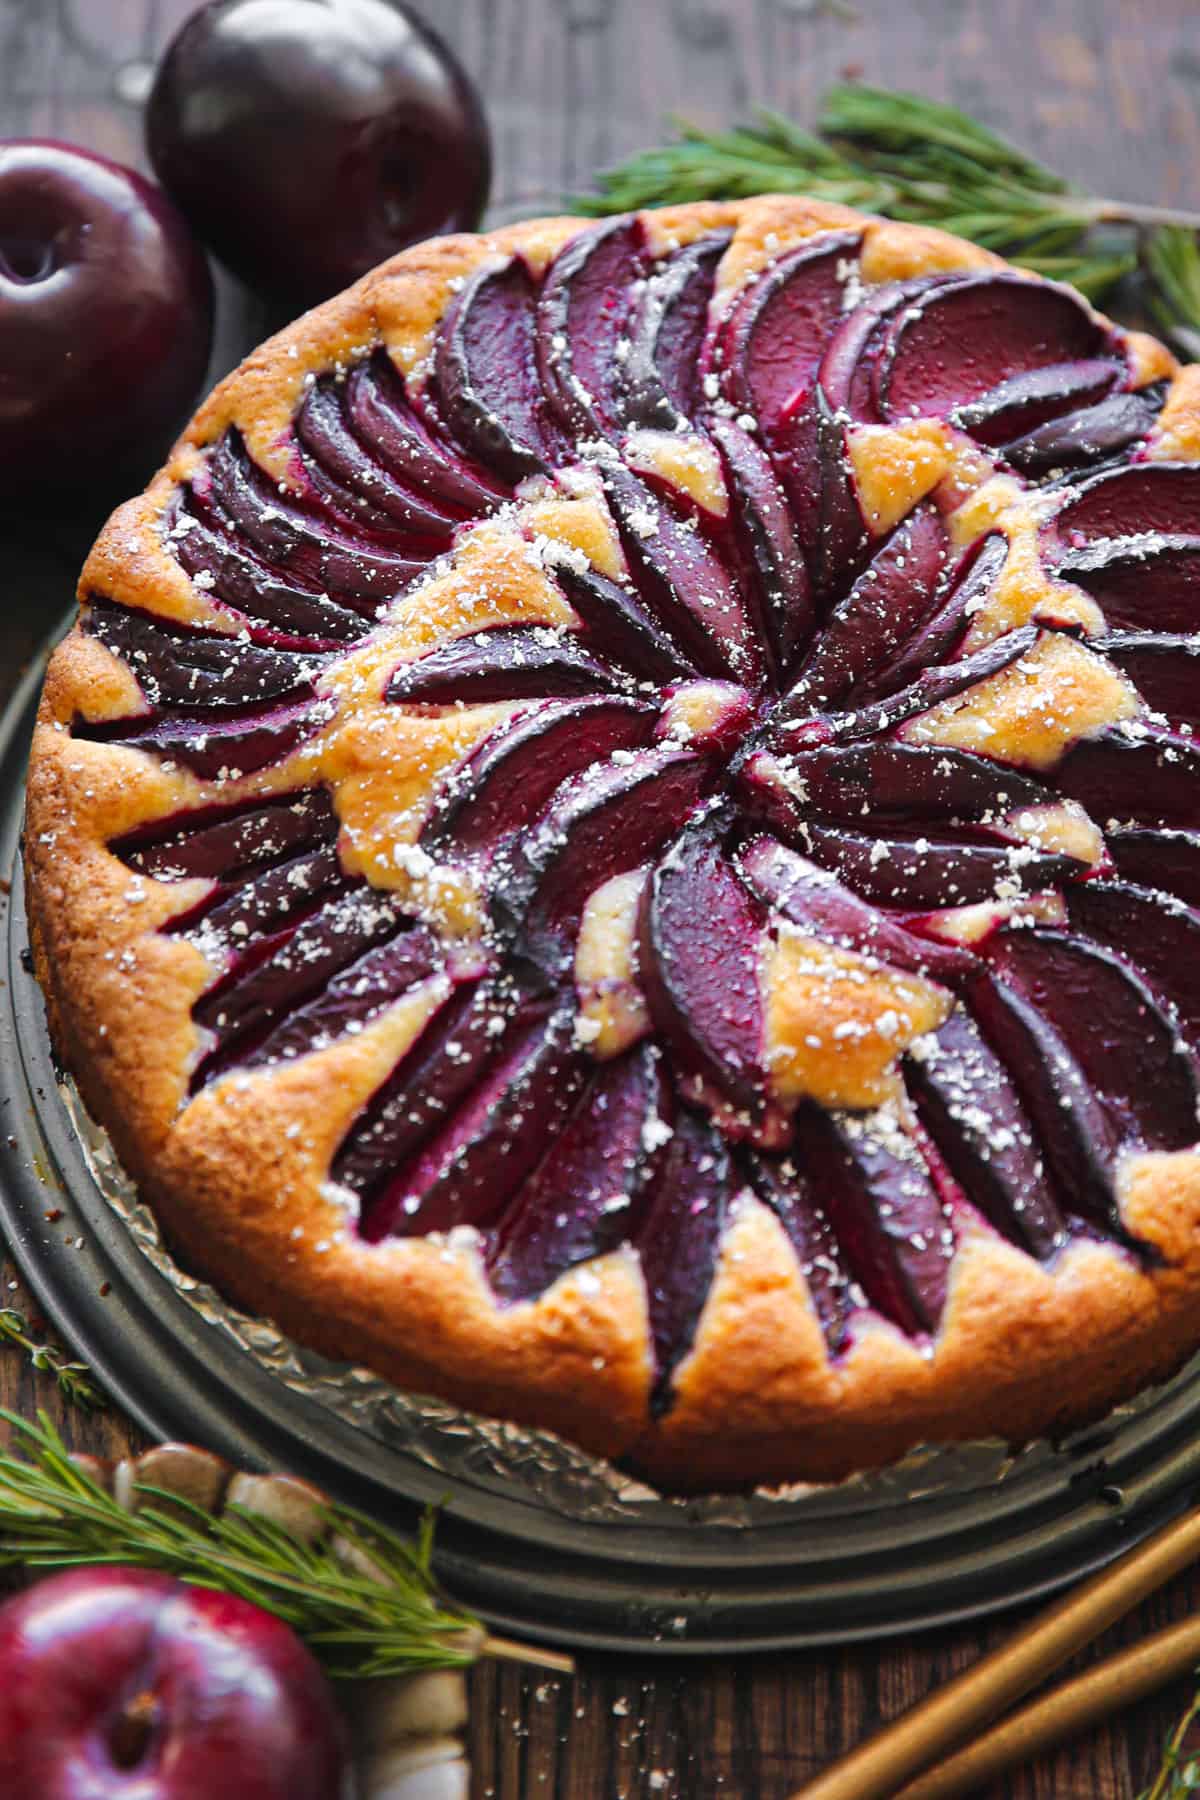 Plum Cake dusted with powdered sugar.